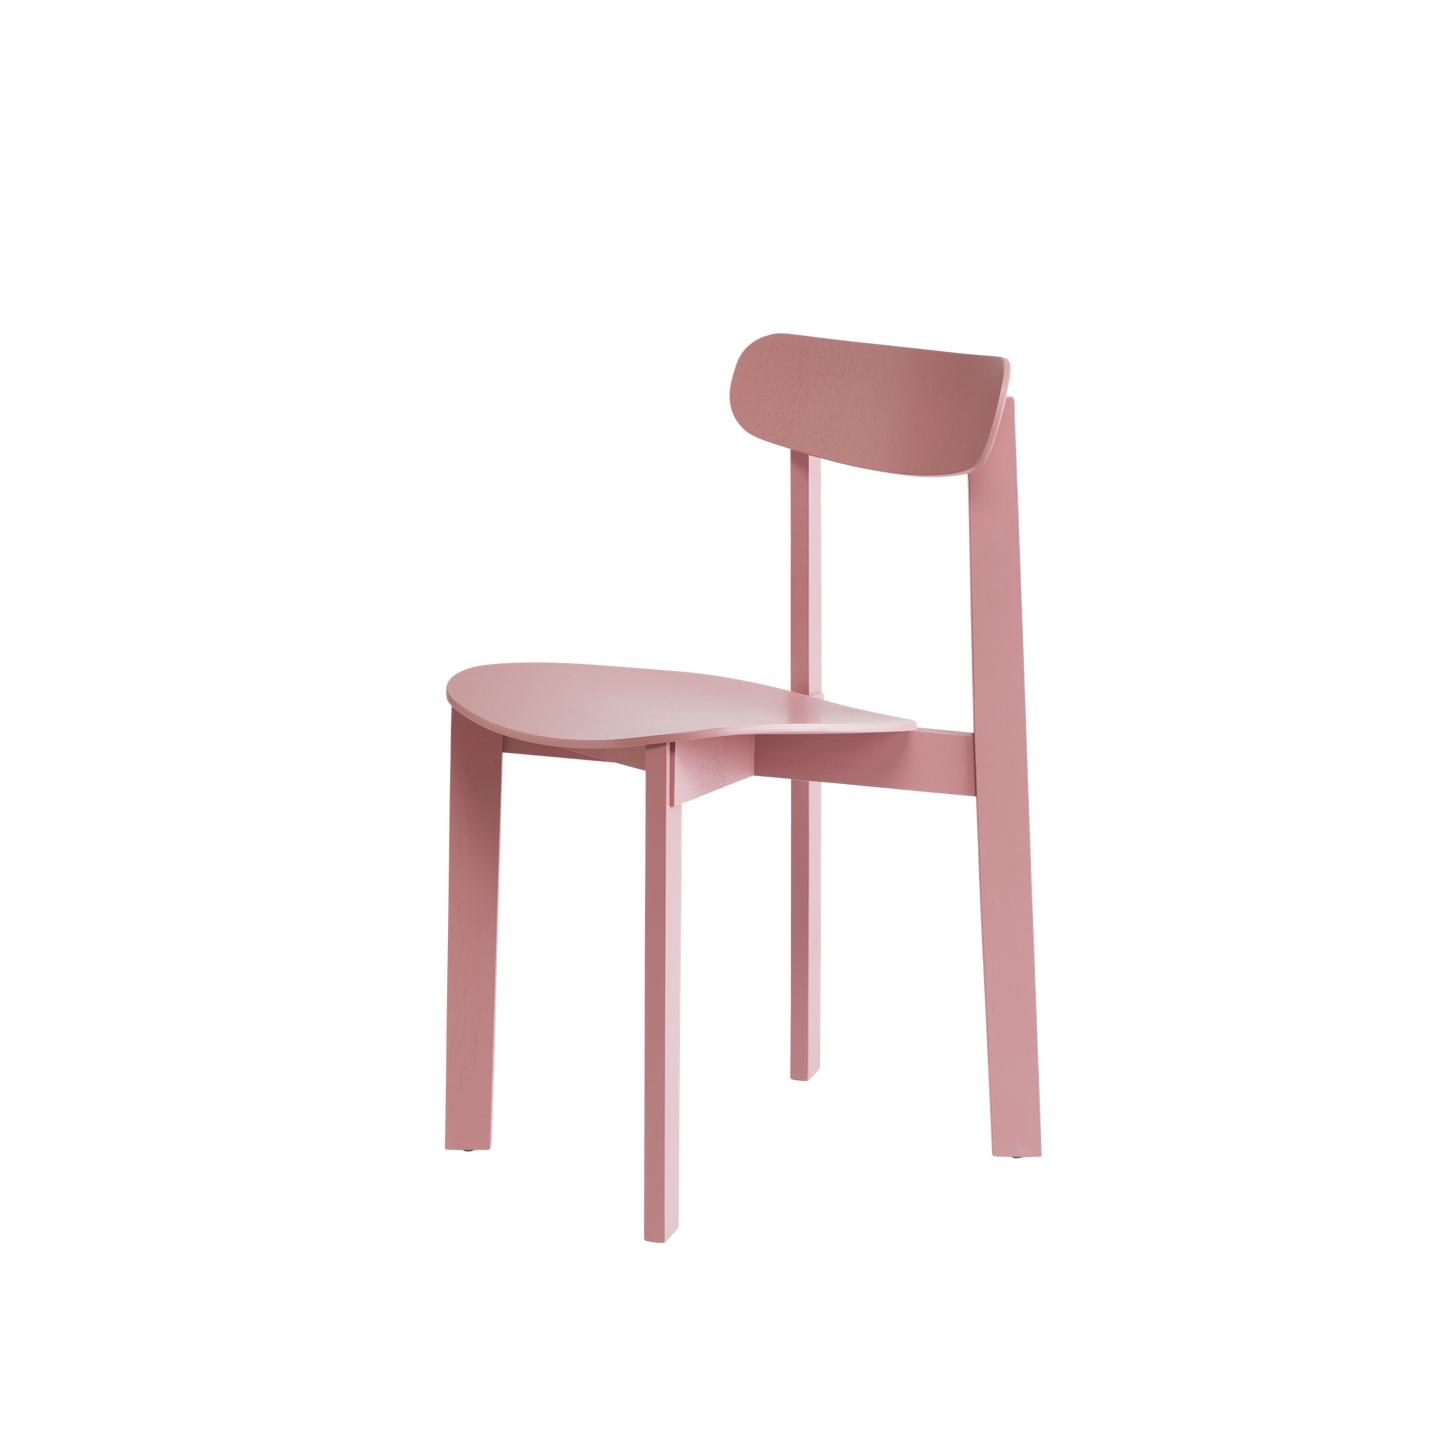 Bondi Dining Chair by Please wait to be seated #Jaipur